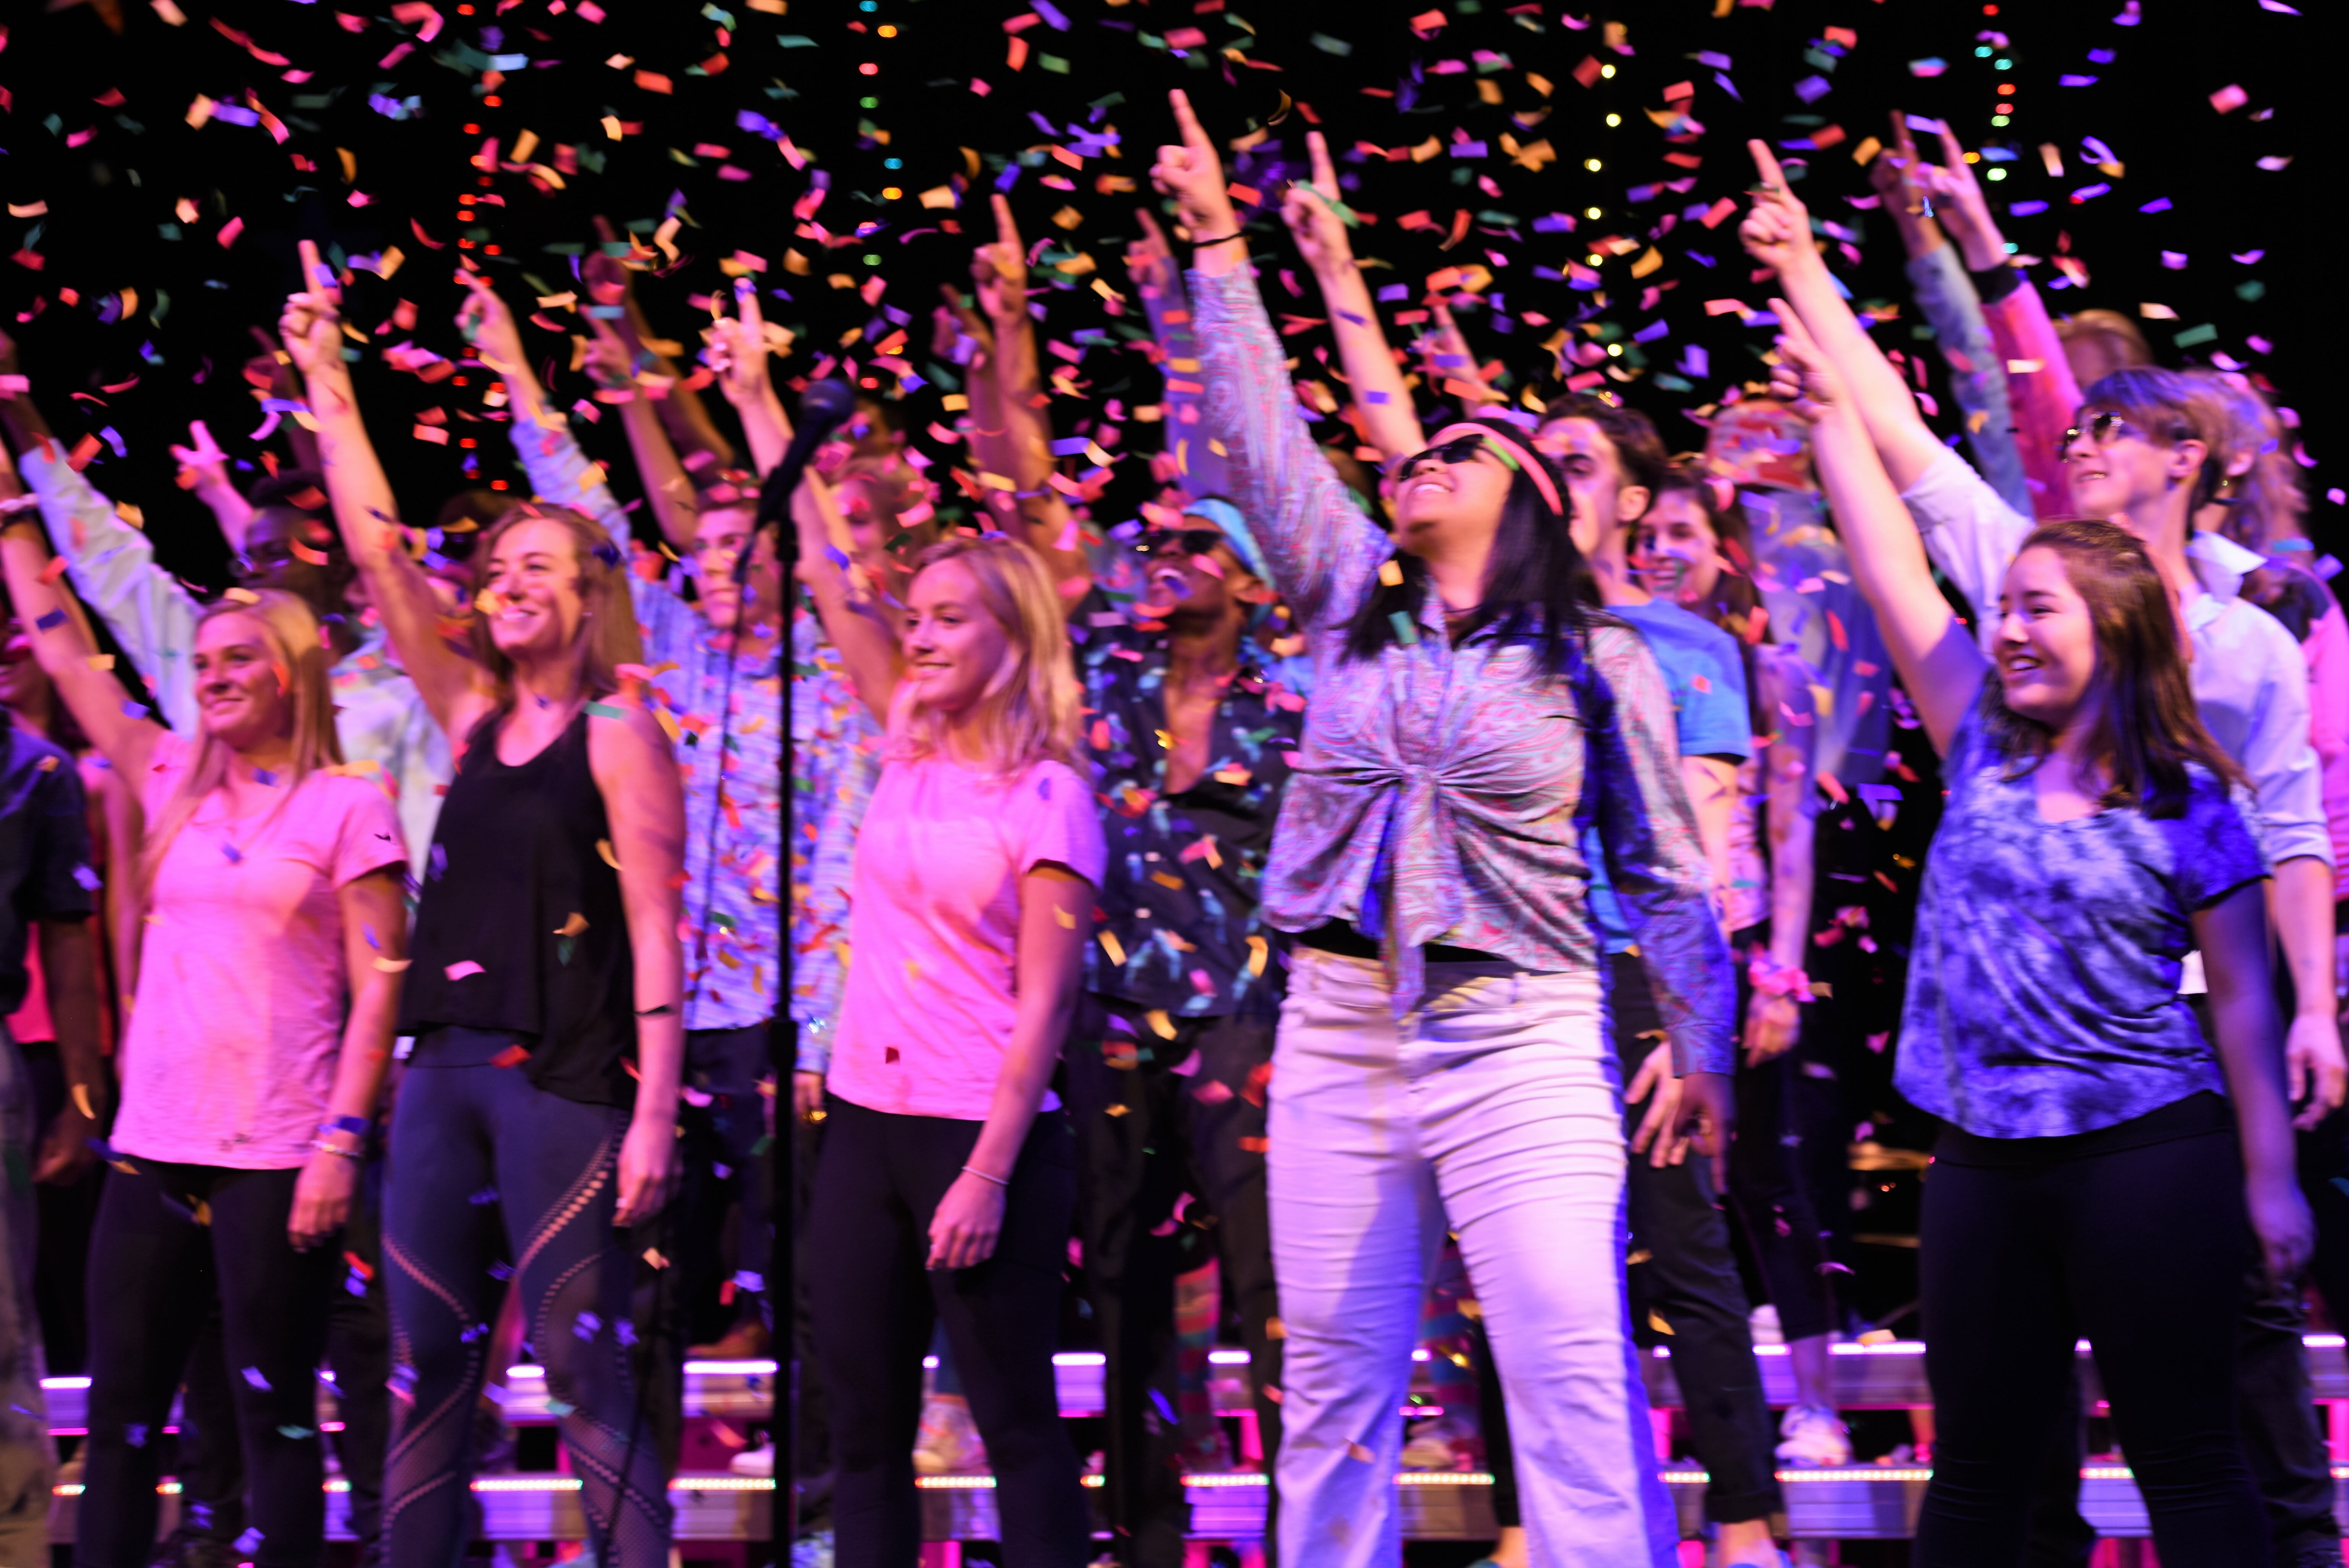 MICDS Upper Schoolers dazzled the audience at the Spring Pops Concert.